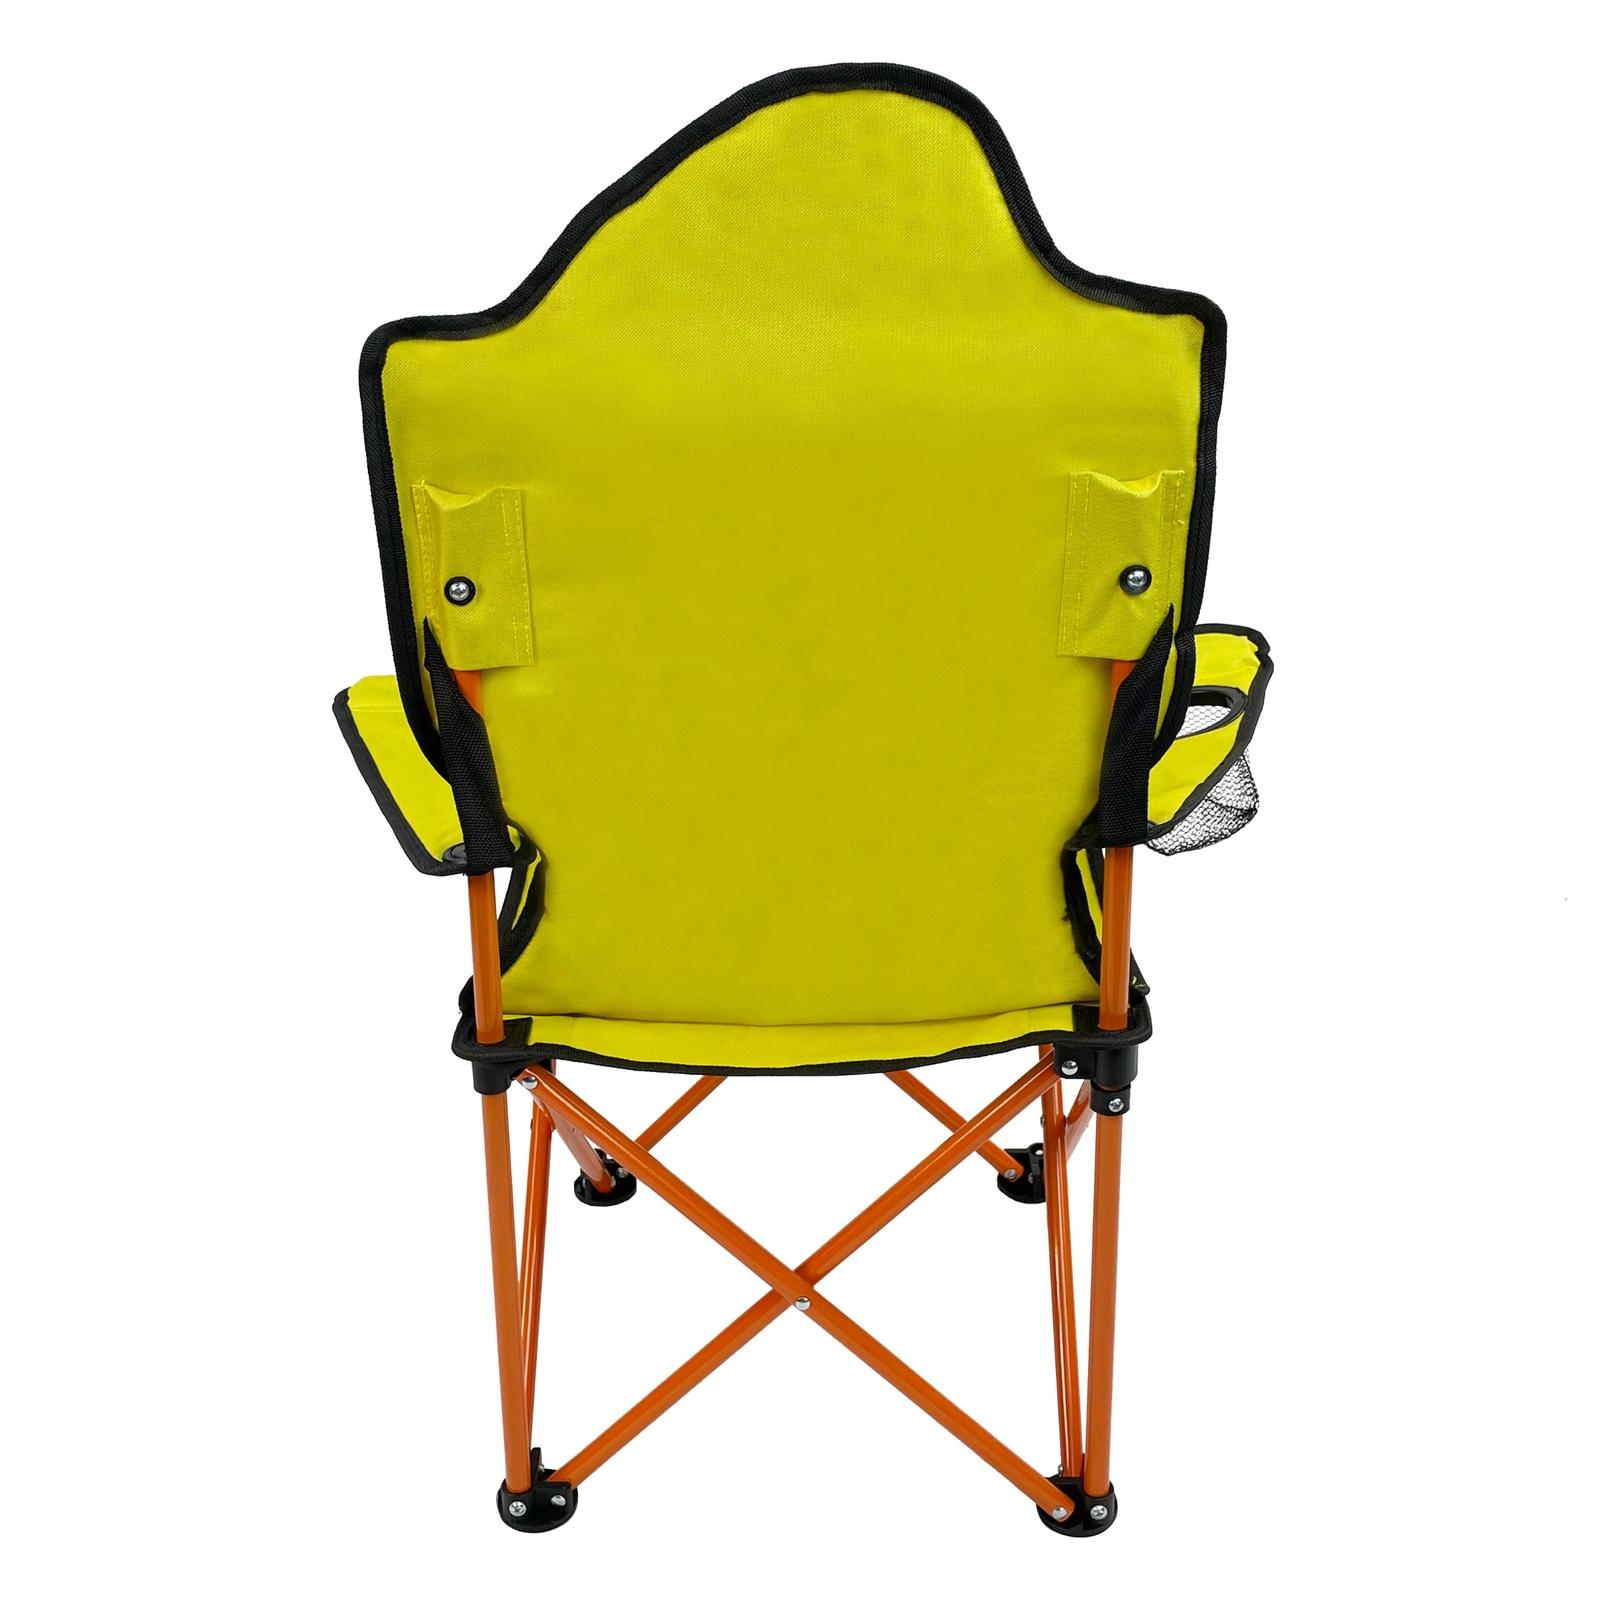 Outdoor Revival Chicken Youth Chair